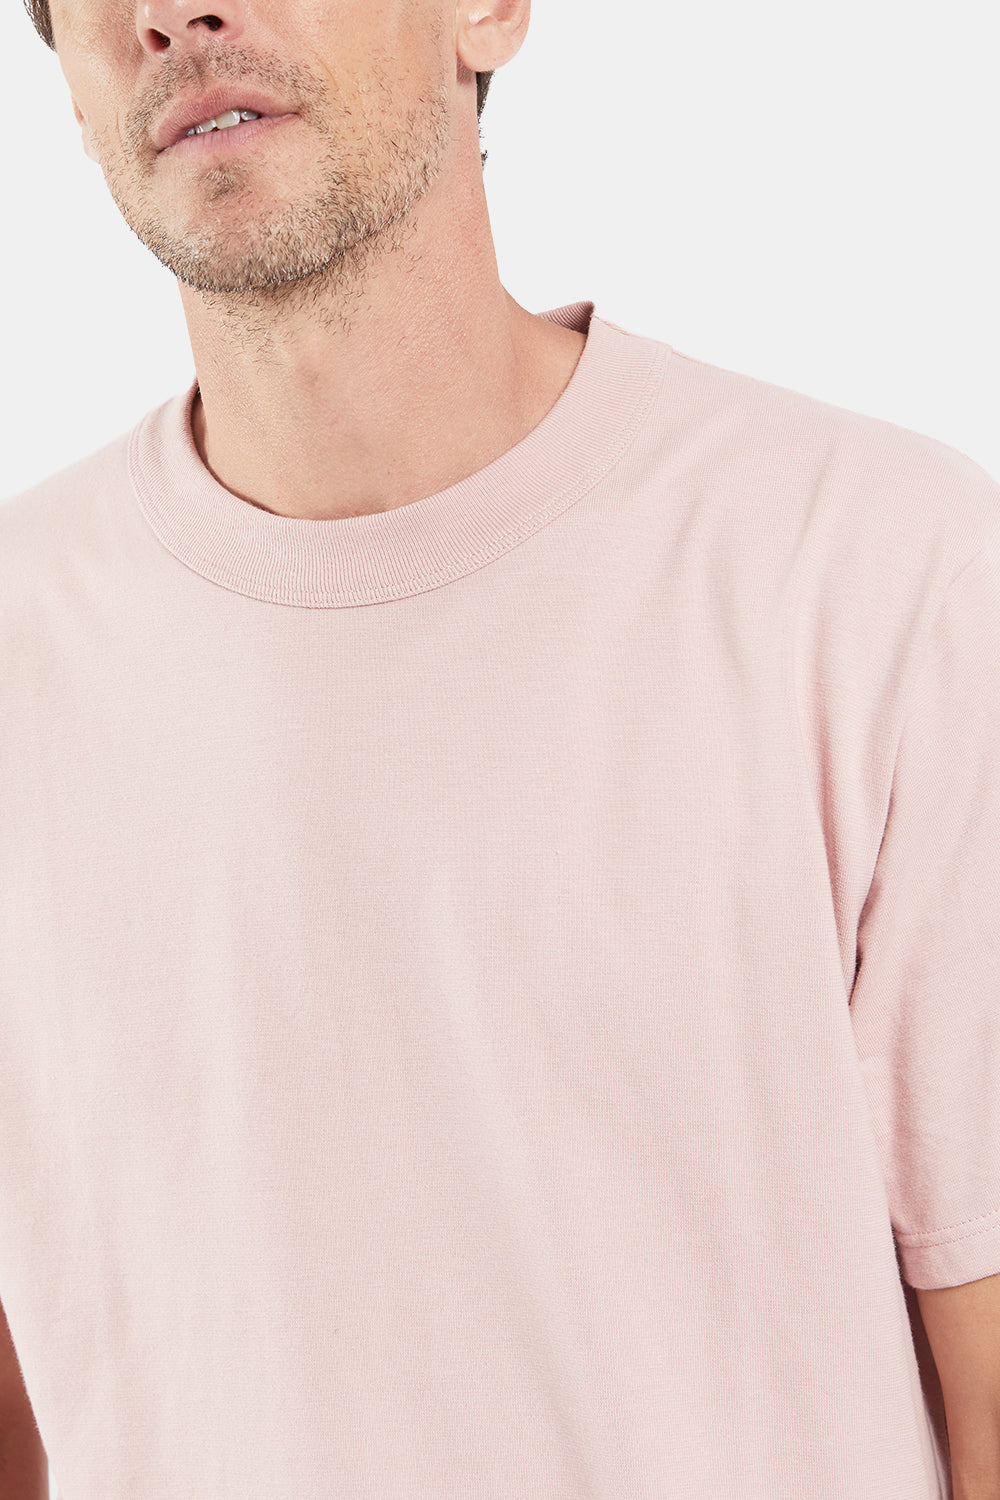 Armor Lux Heritage Organic Callac T-Shirt (Antic Pink)